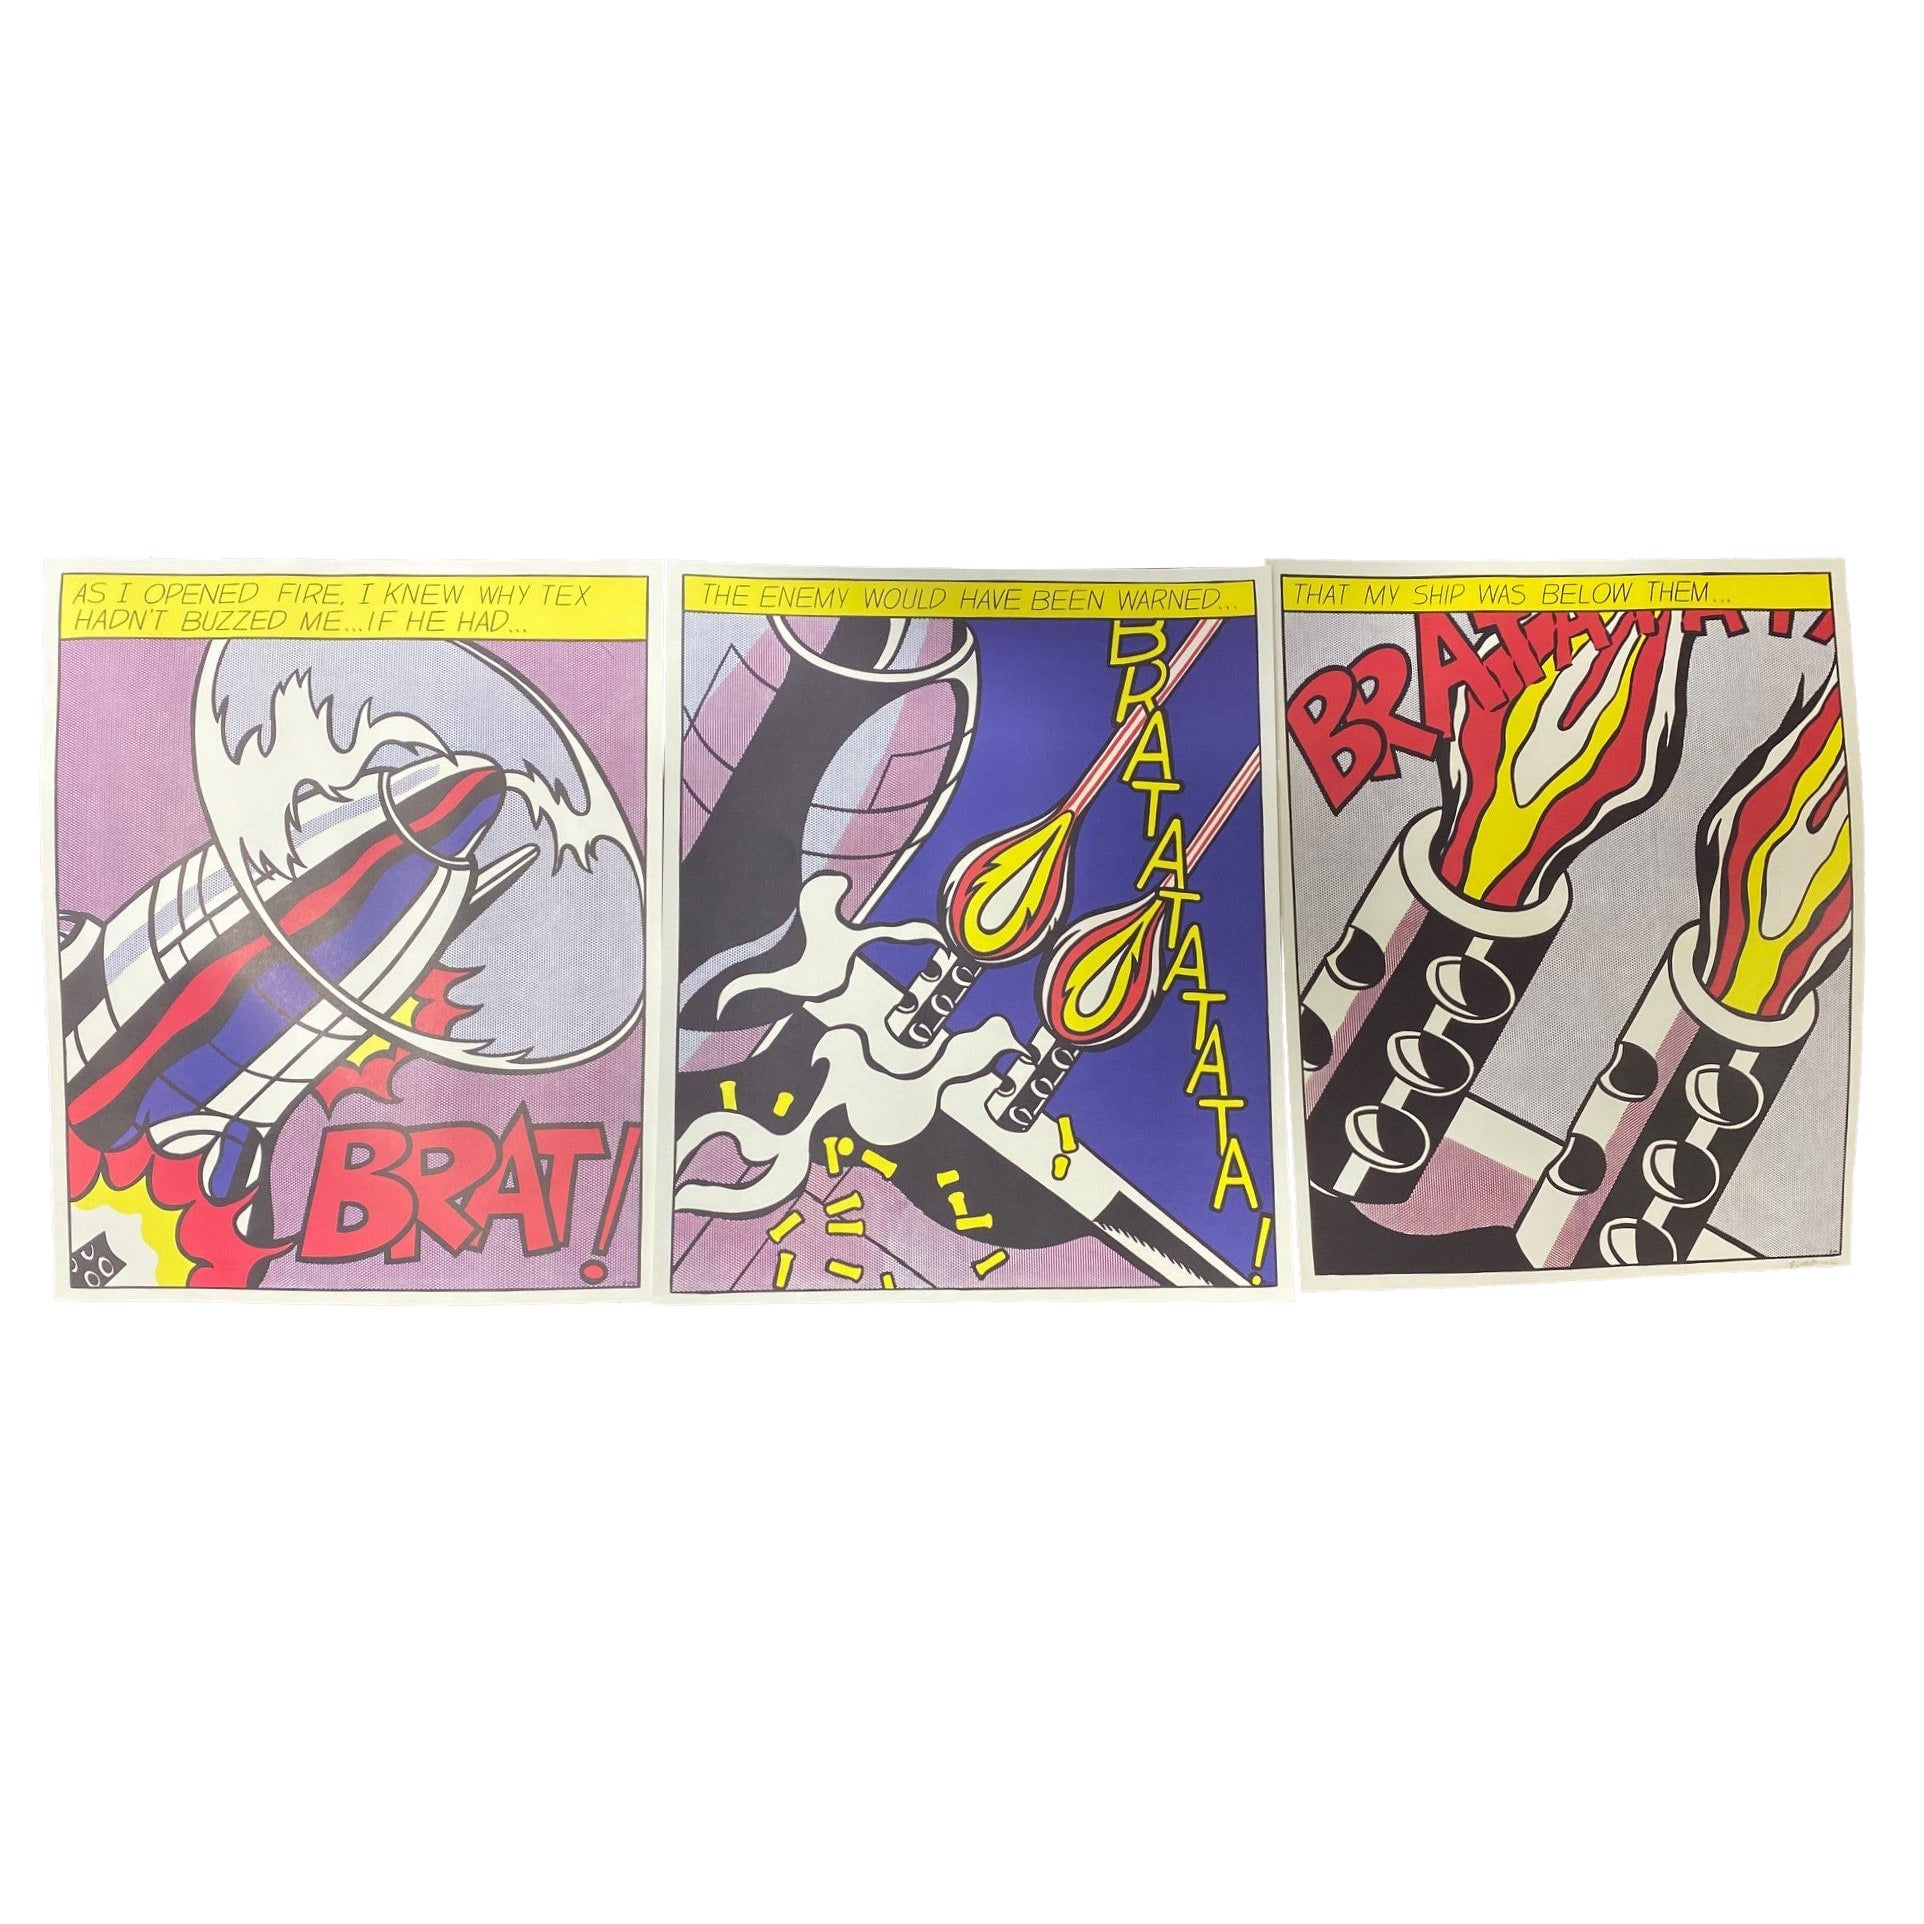 Roy Lichtenstein Hand Signed Triptych Print "As I Opened Fire" Stedelijk Museum For Sale